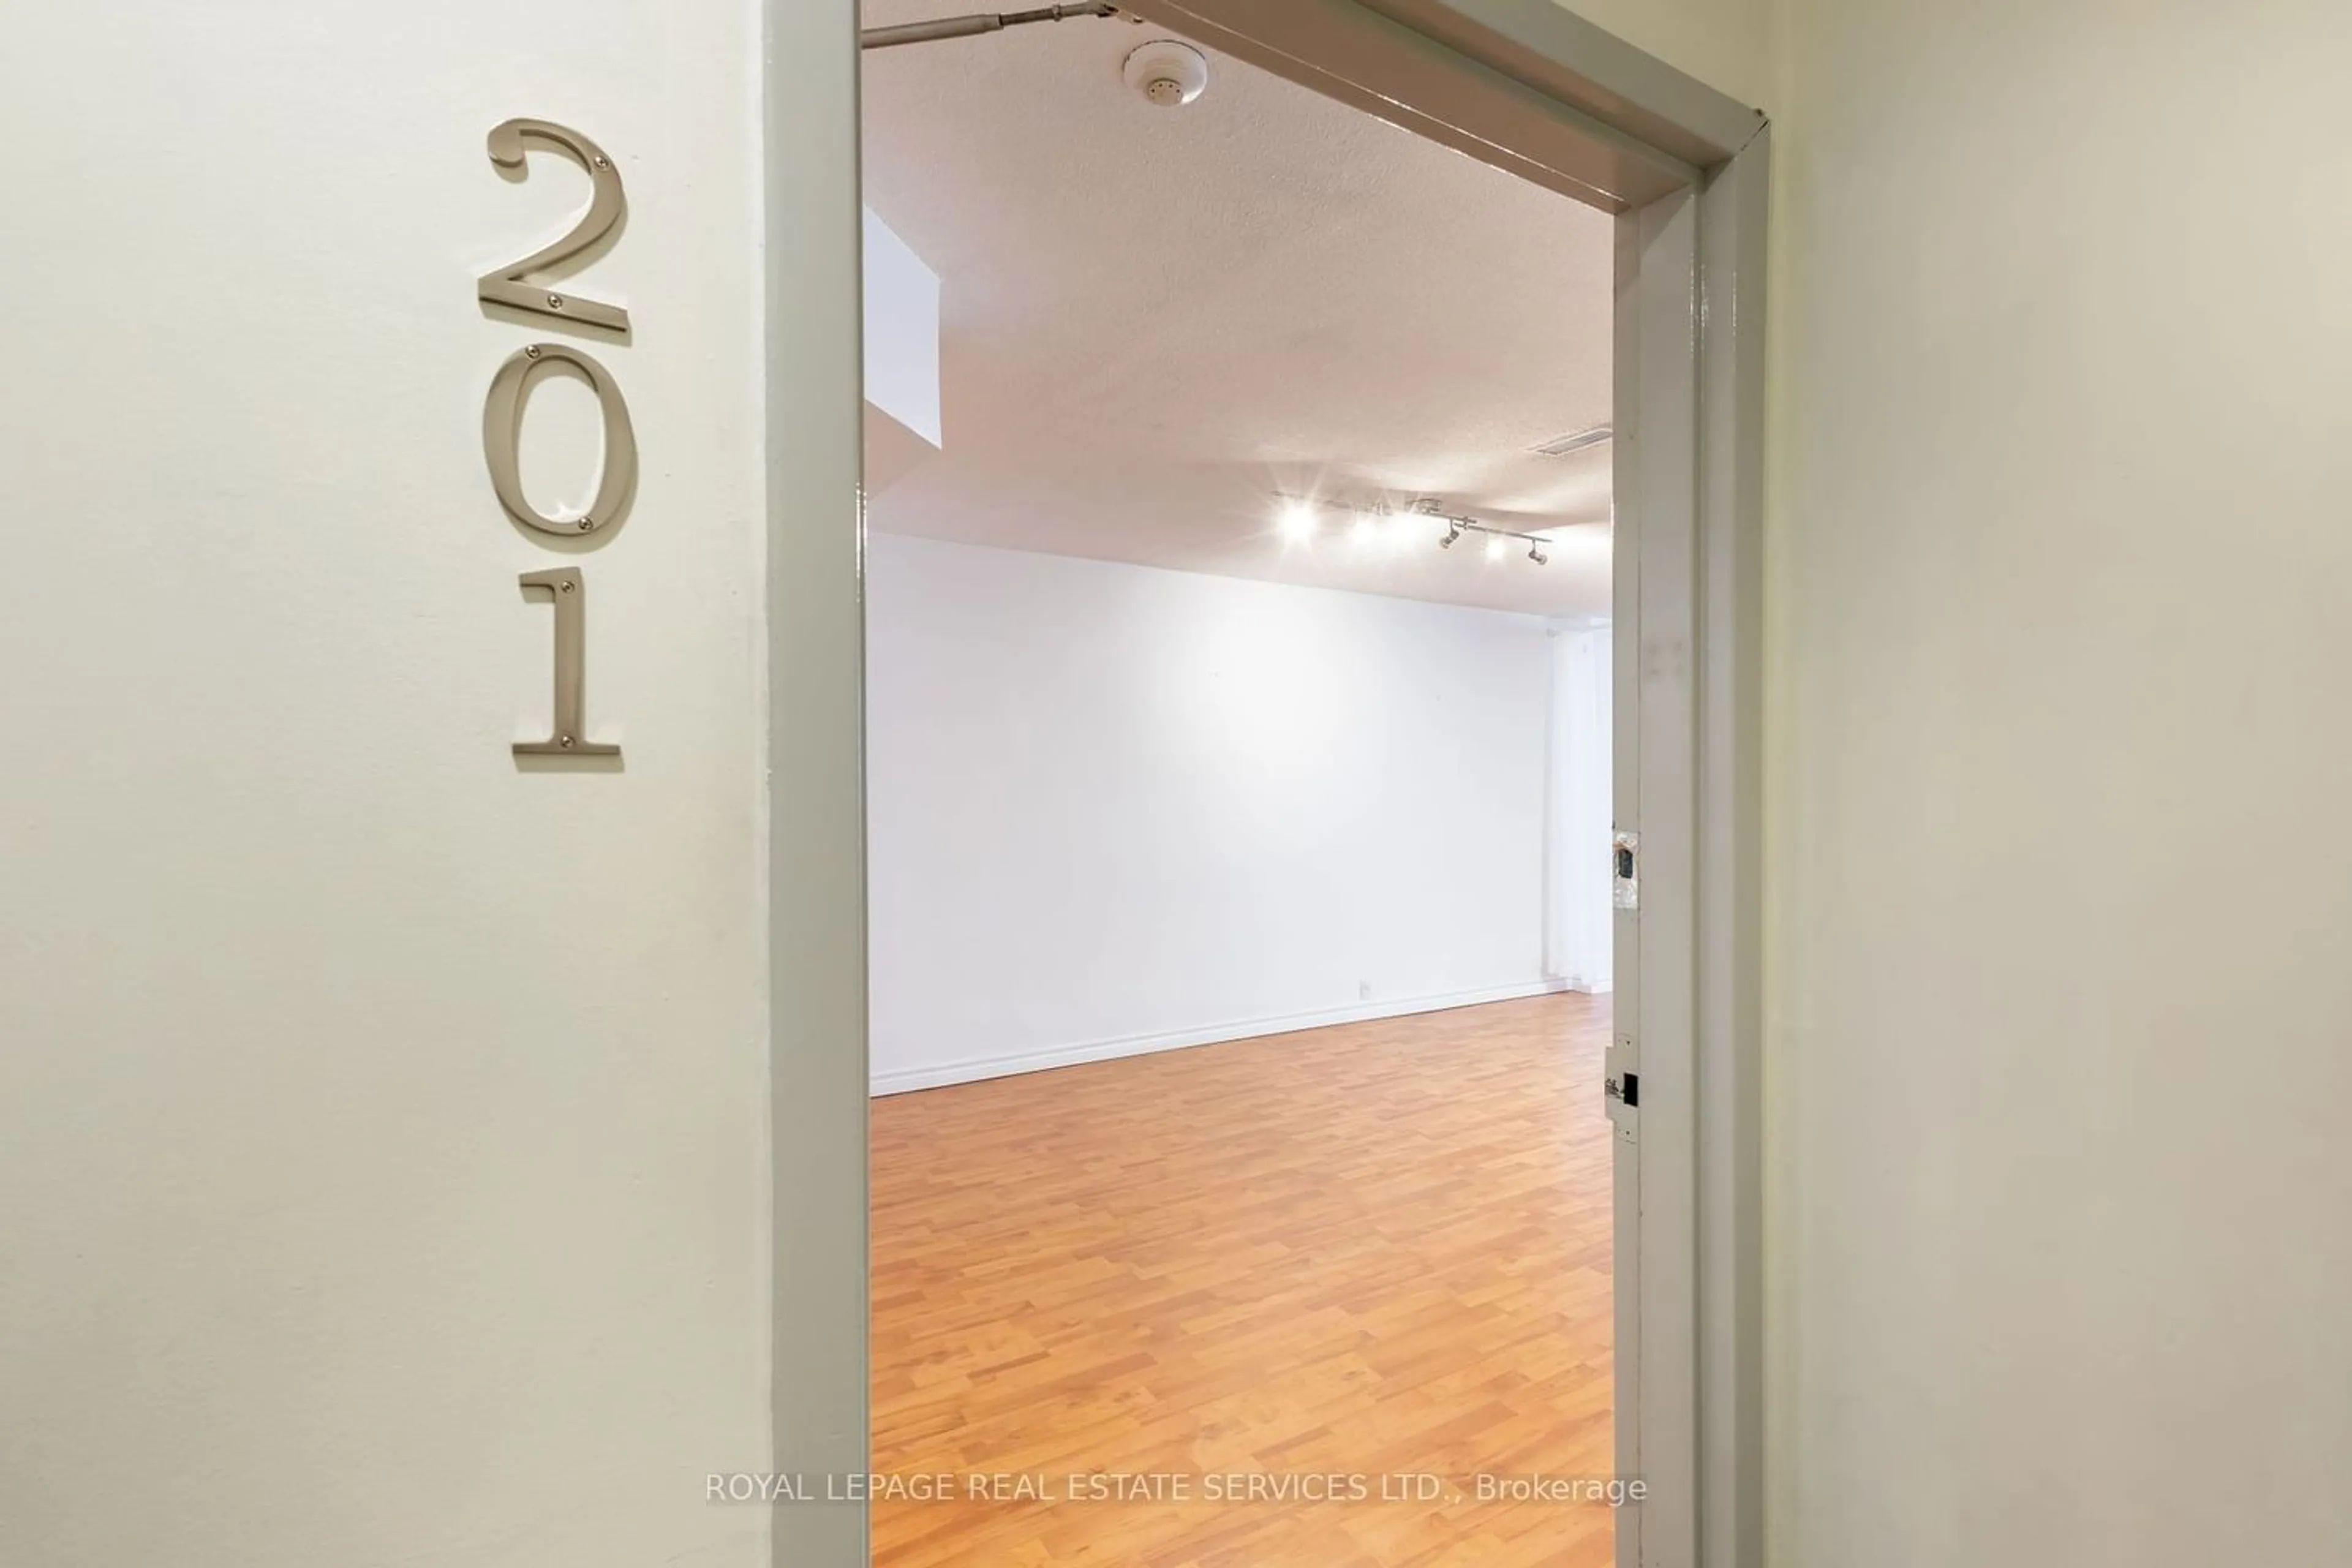 Other indoor space for 2963 Dundas St, Toronto Ontario M6P 1Z2